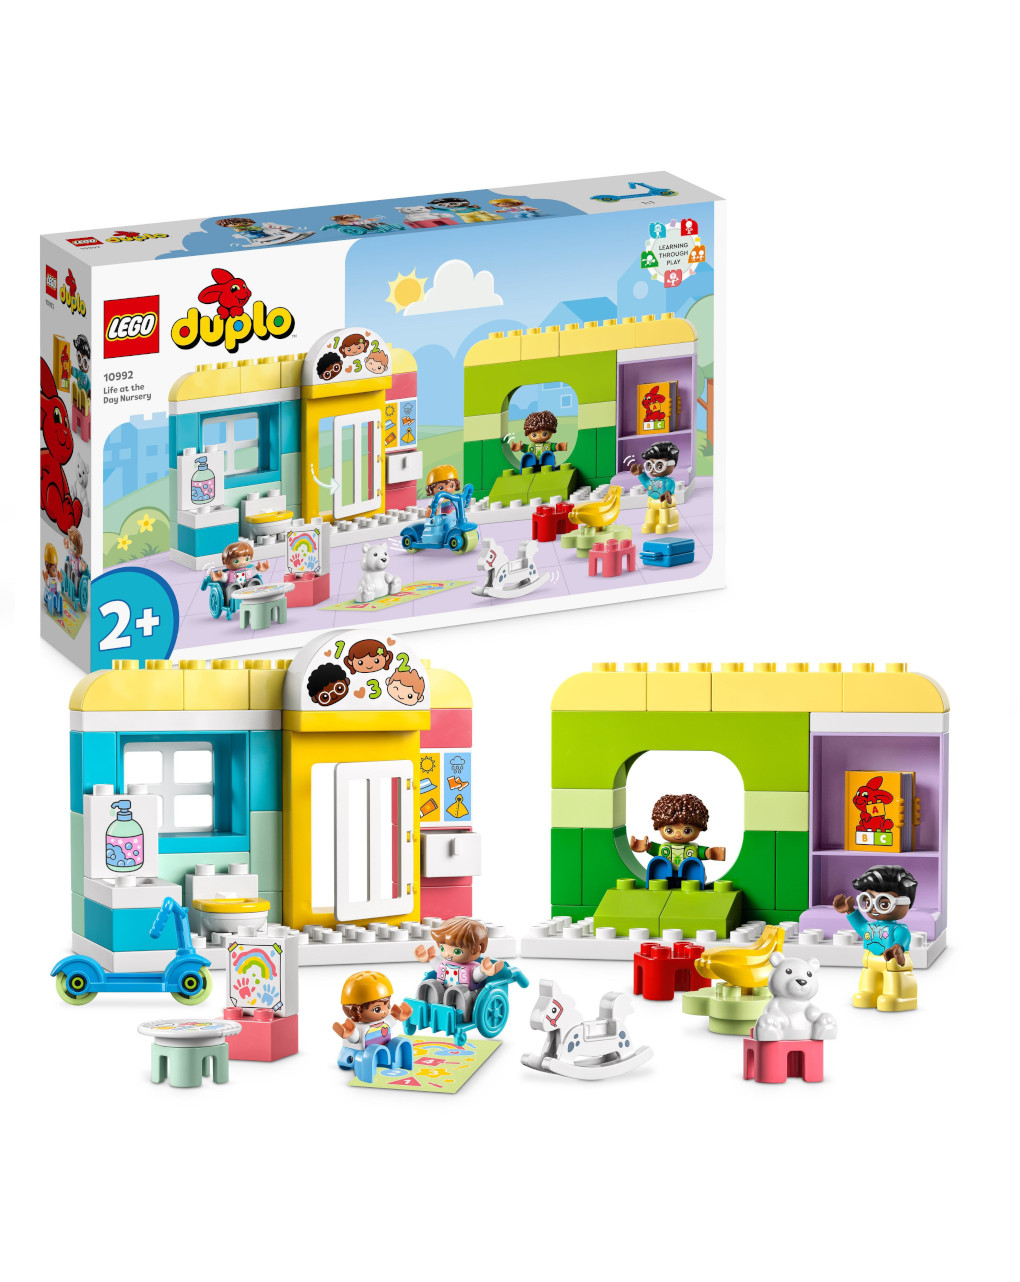 Lego duplo life at the day-care center 10992